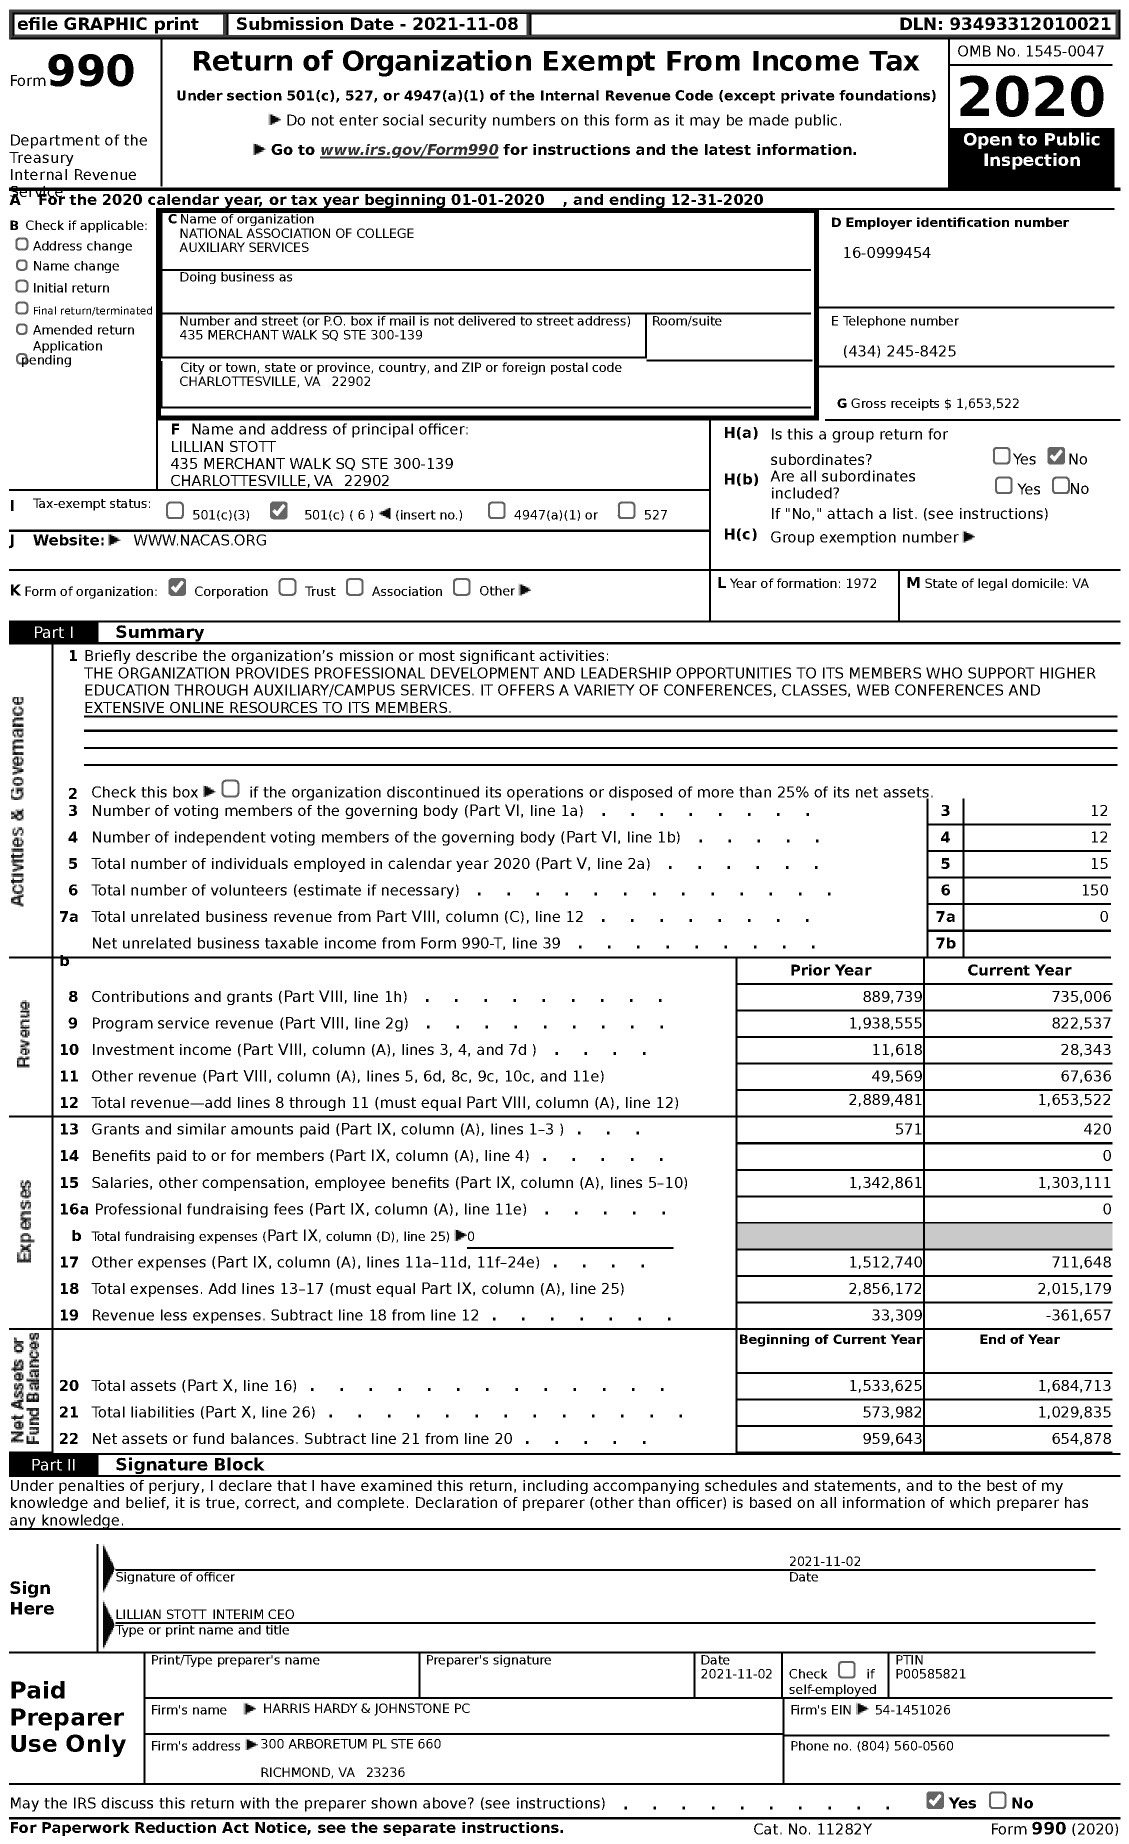 Image of first page of 2020 Form 990 for Association of College Auxiliary Services (NACAS)